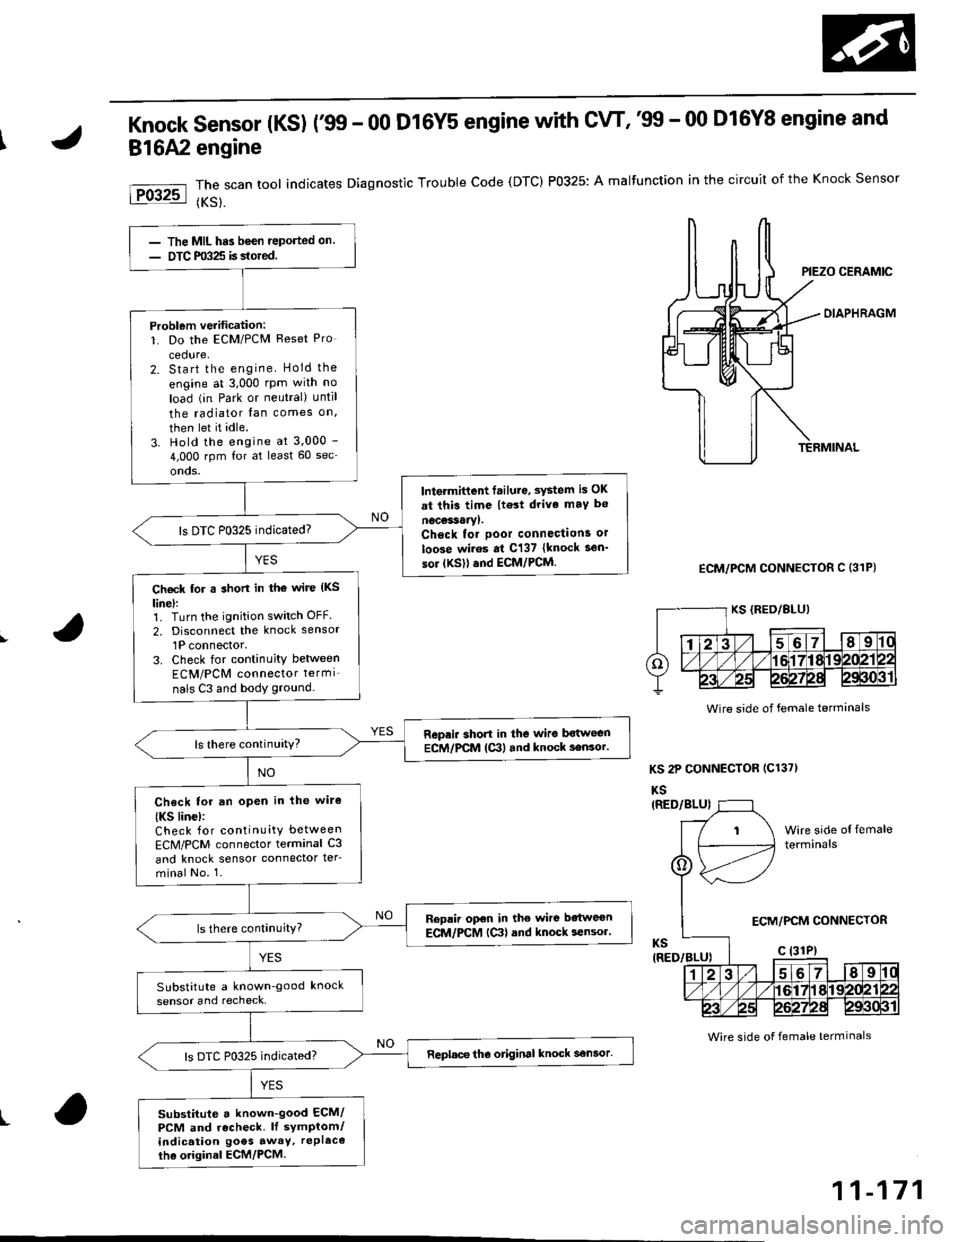 HONDA CIVIC 1996 6.G Workshop Manual Knock sensor (Ks) r99 - 00 D16Y5 engine with cw, 99 - 00 D16Y8 engine and
816A2 engine
The scan tool indicates Diagnostic Trouble Code (DTC) P0325: A malfunction in the circuit of the Knock Sensor
{K